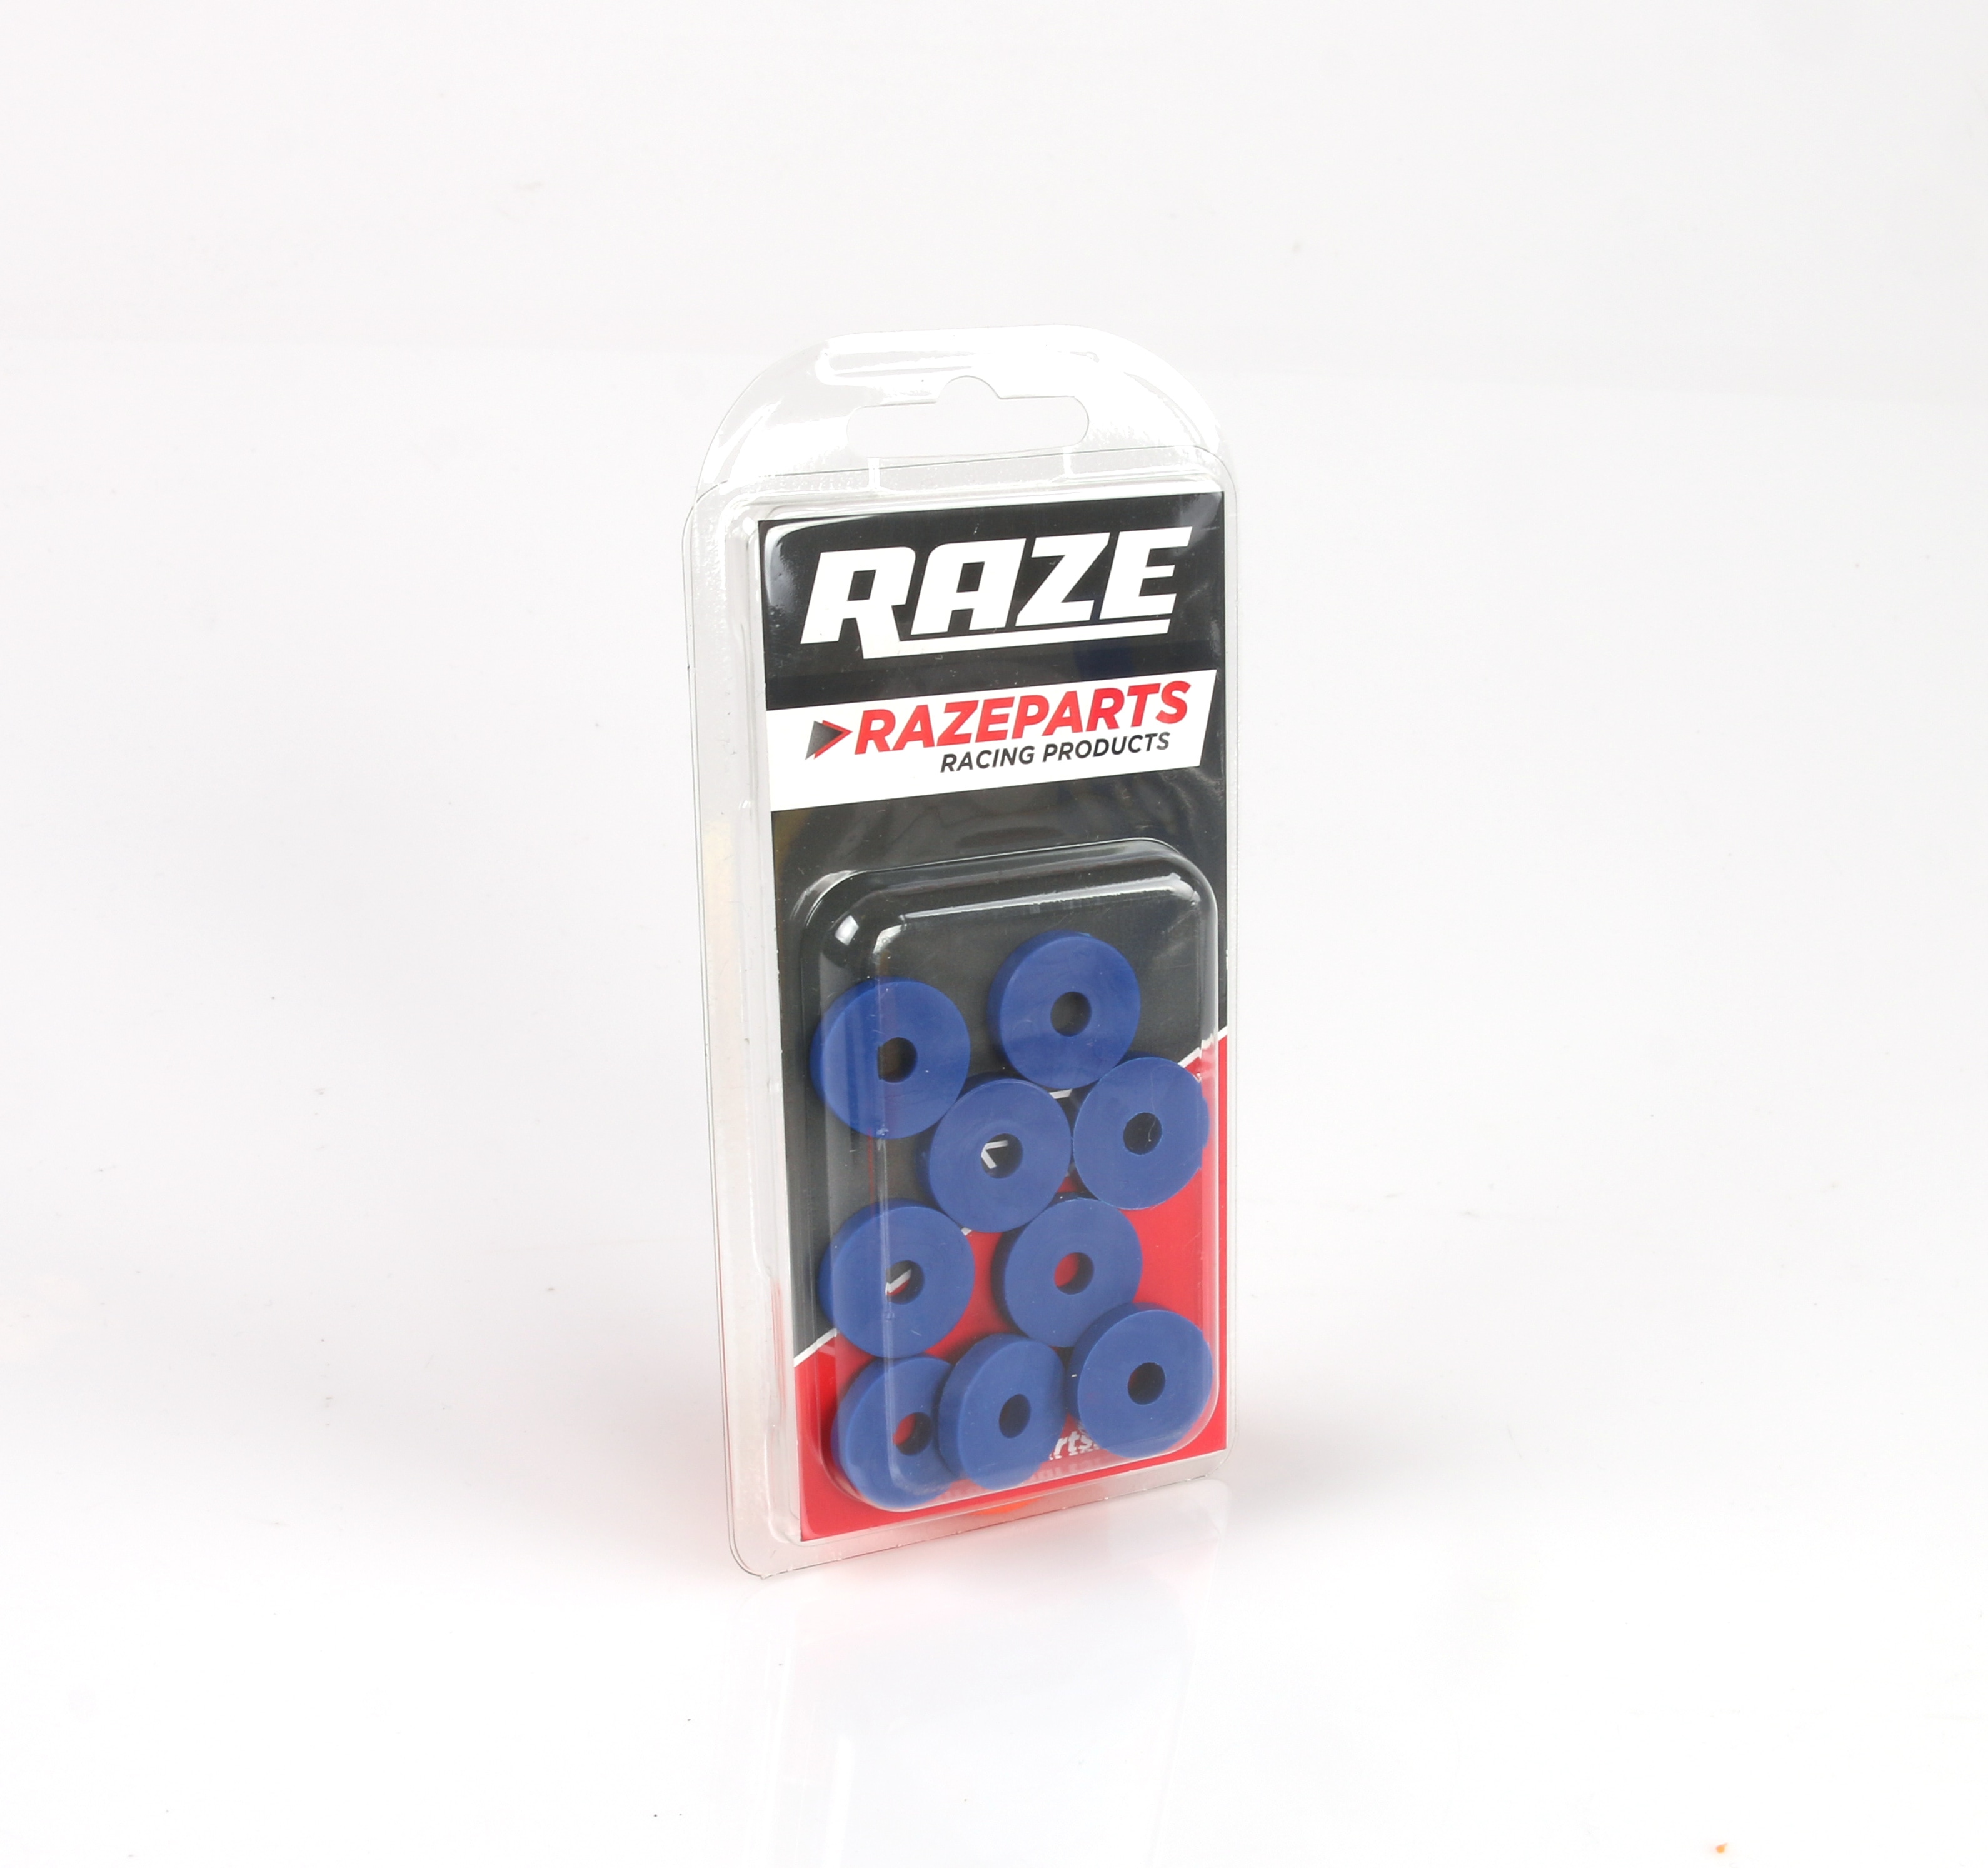 Rubber Washer 6x20mm Blue 10-Pack